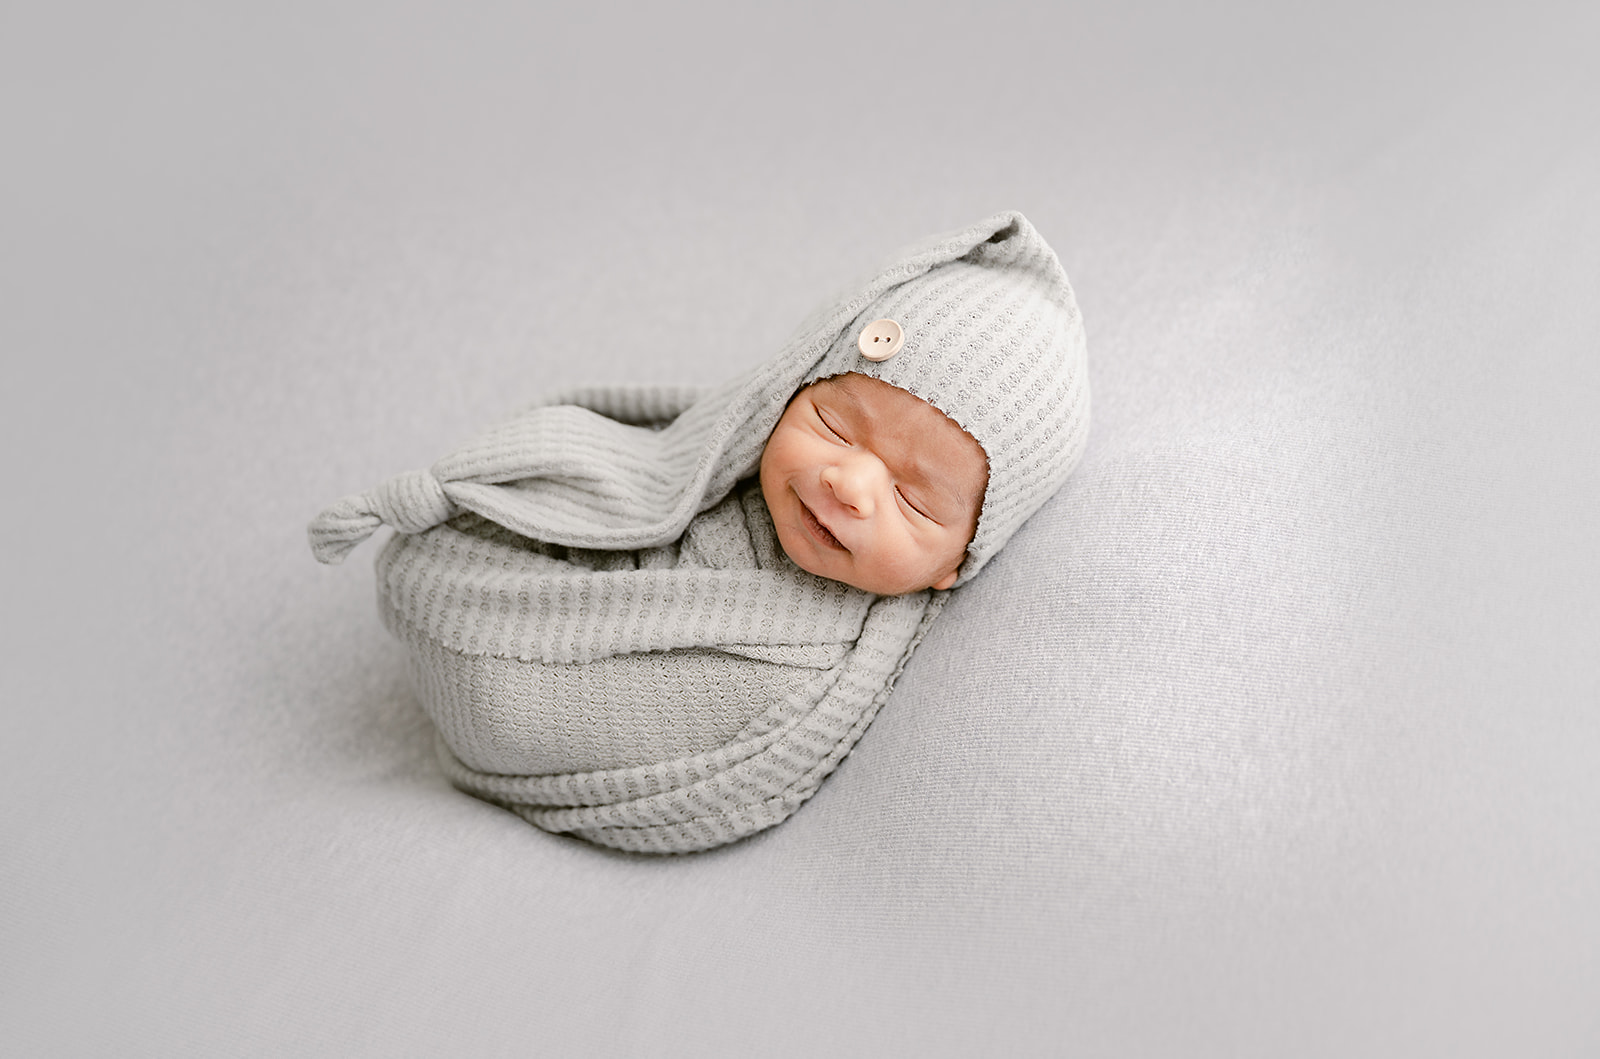 Smiling Baby | Princeton MN Newborn Photography Studio | Safety Certified Newborn Photographer with 10 years experience